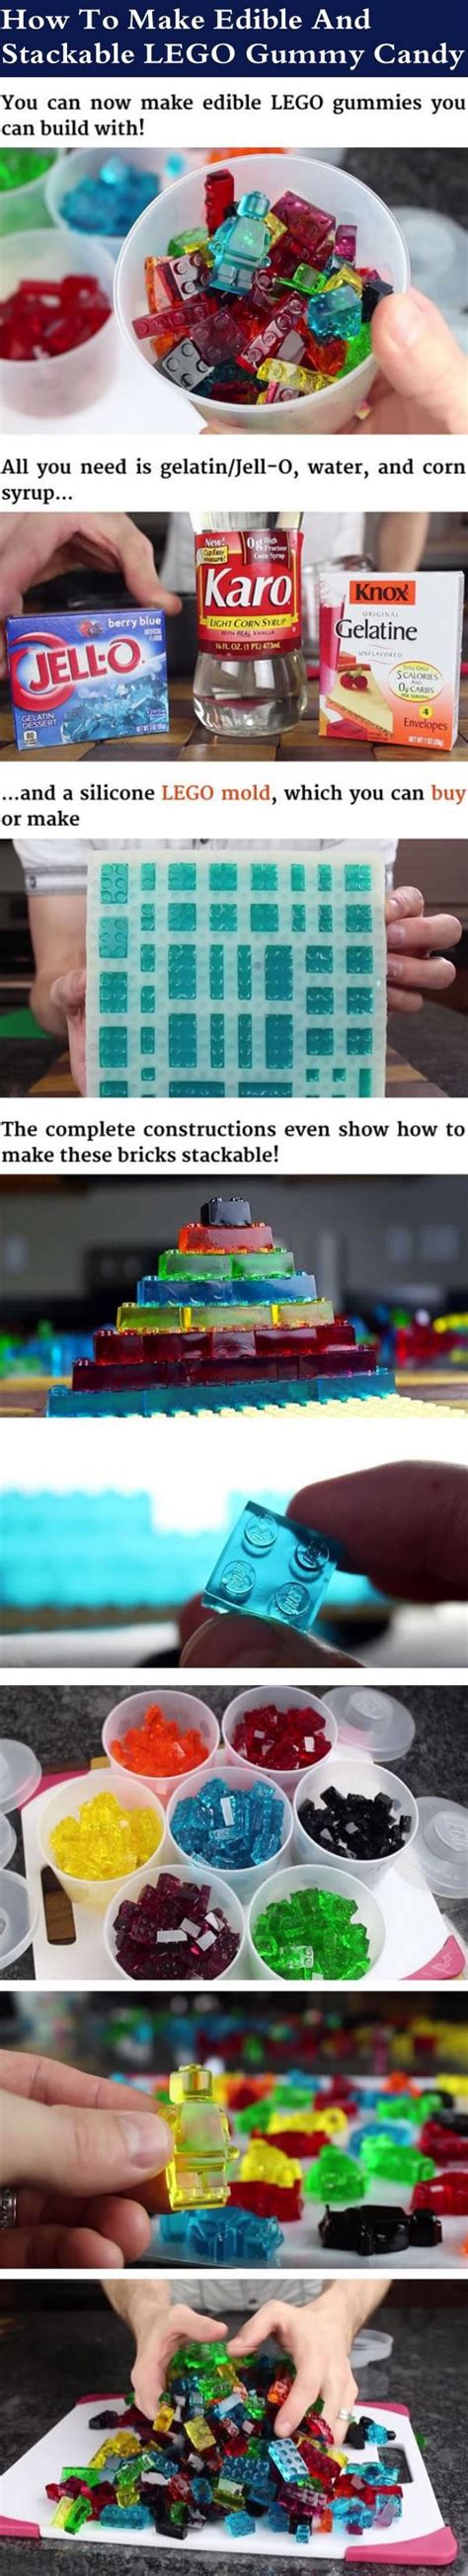 How To Make Edible And Stackable Lego Gummy Candy Pictures Photos And